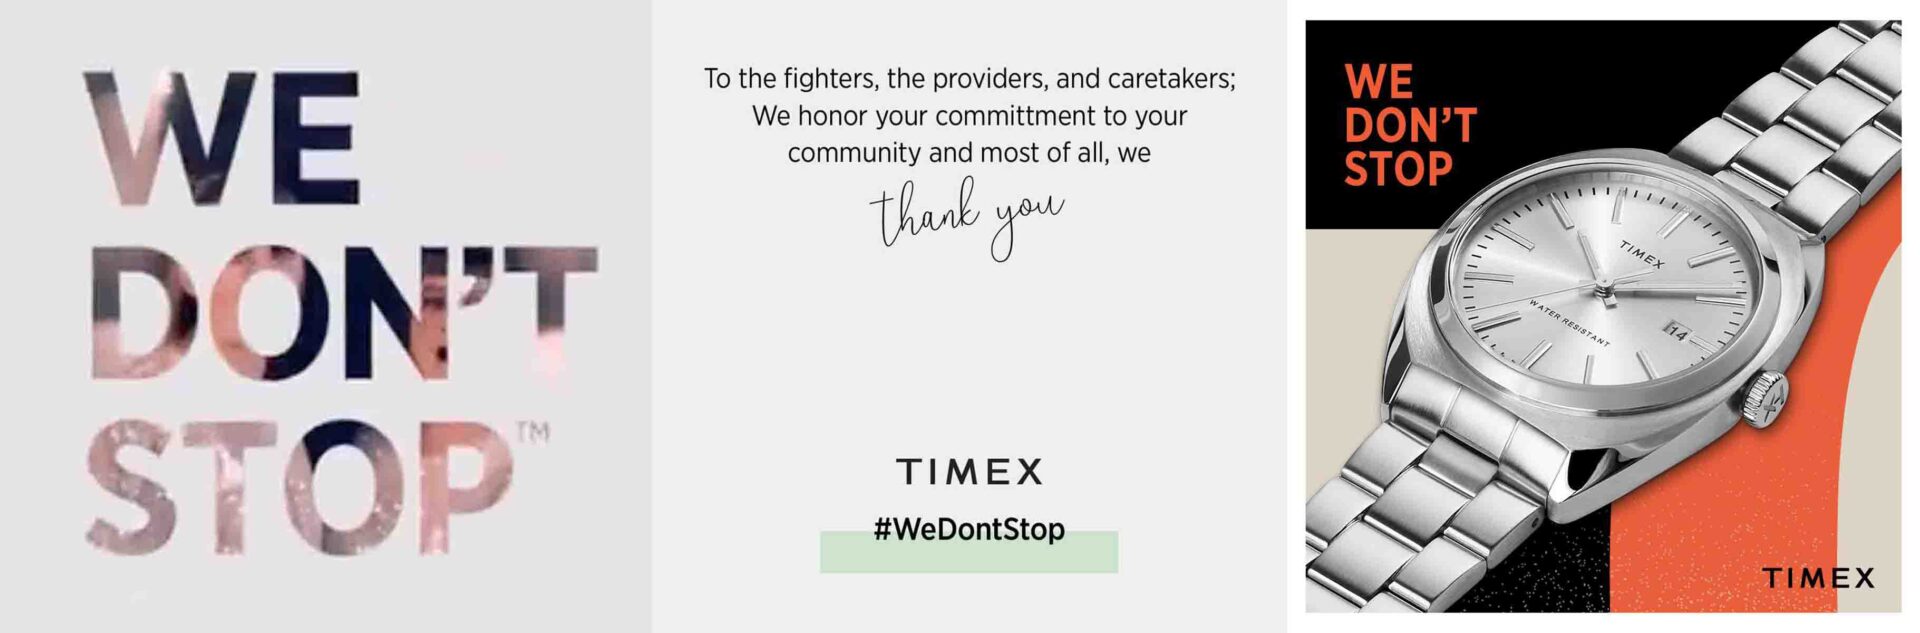 Timex We Dont Stop 2